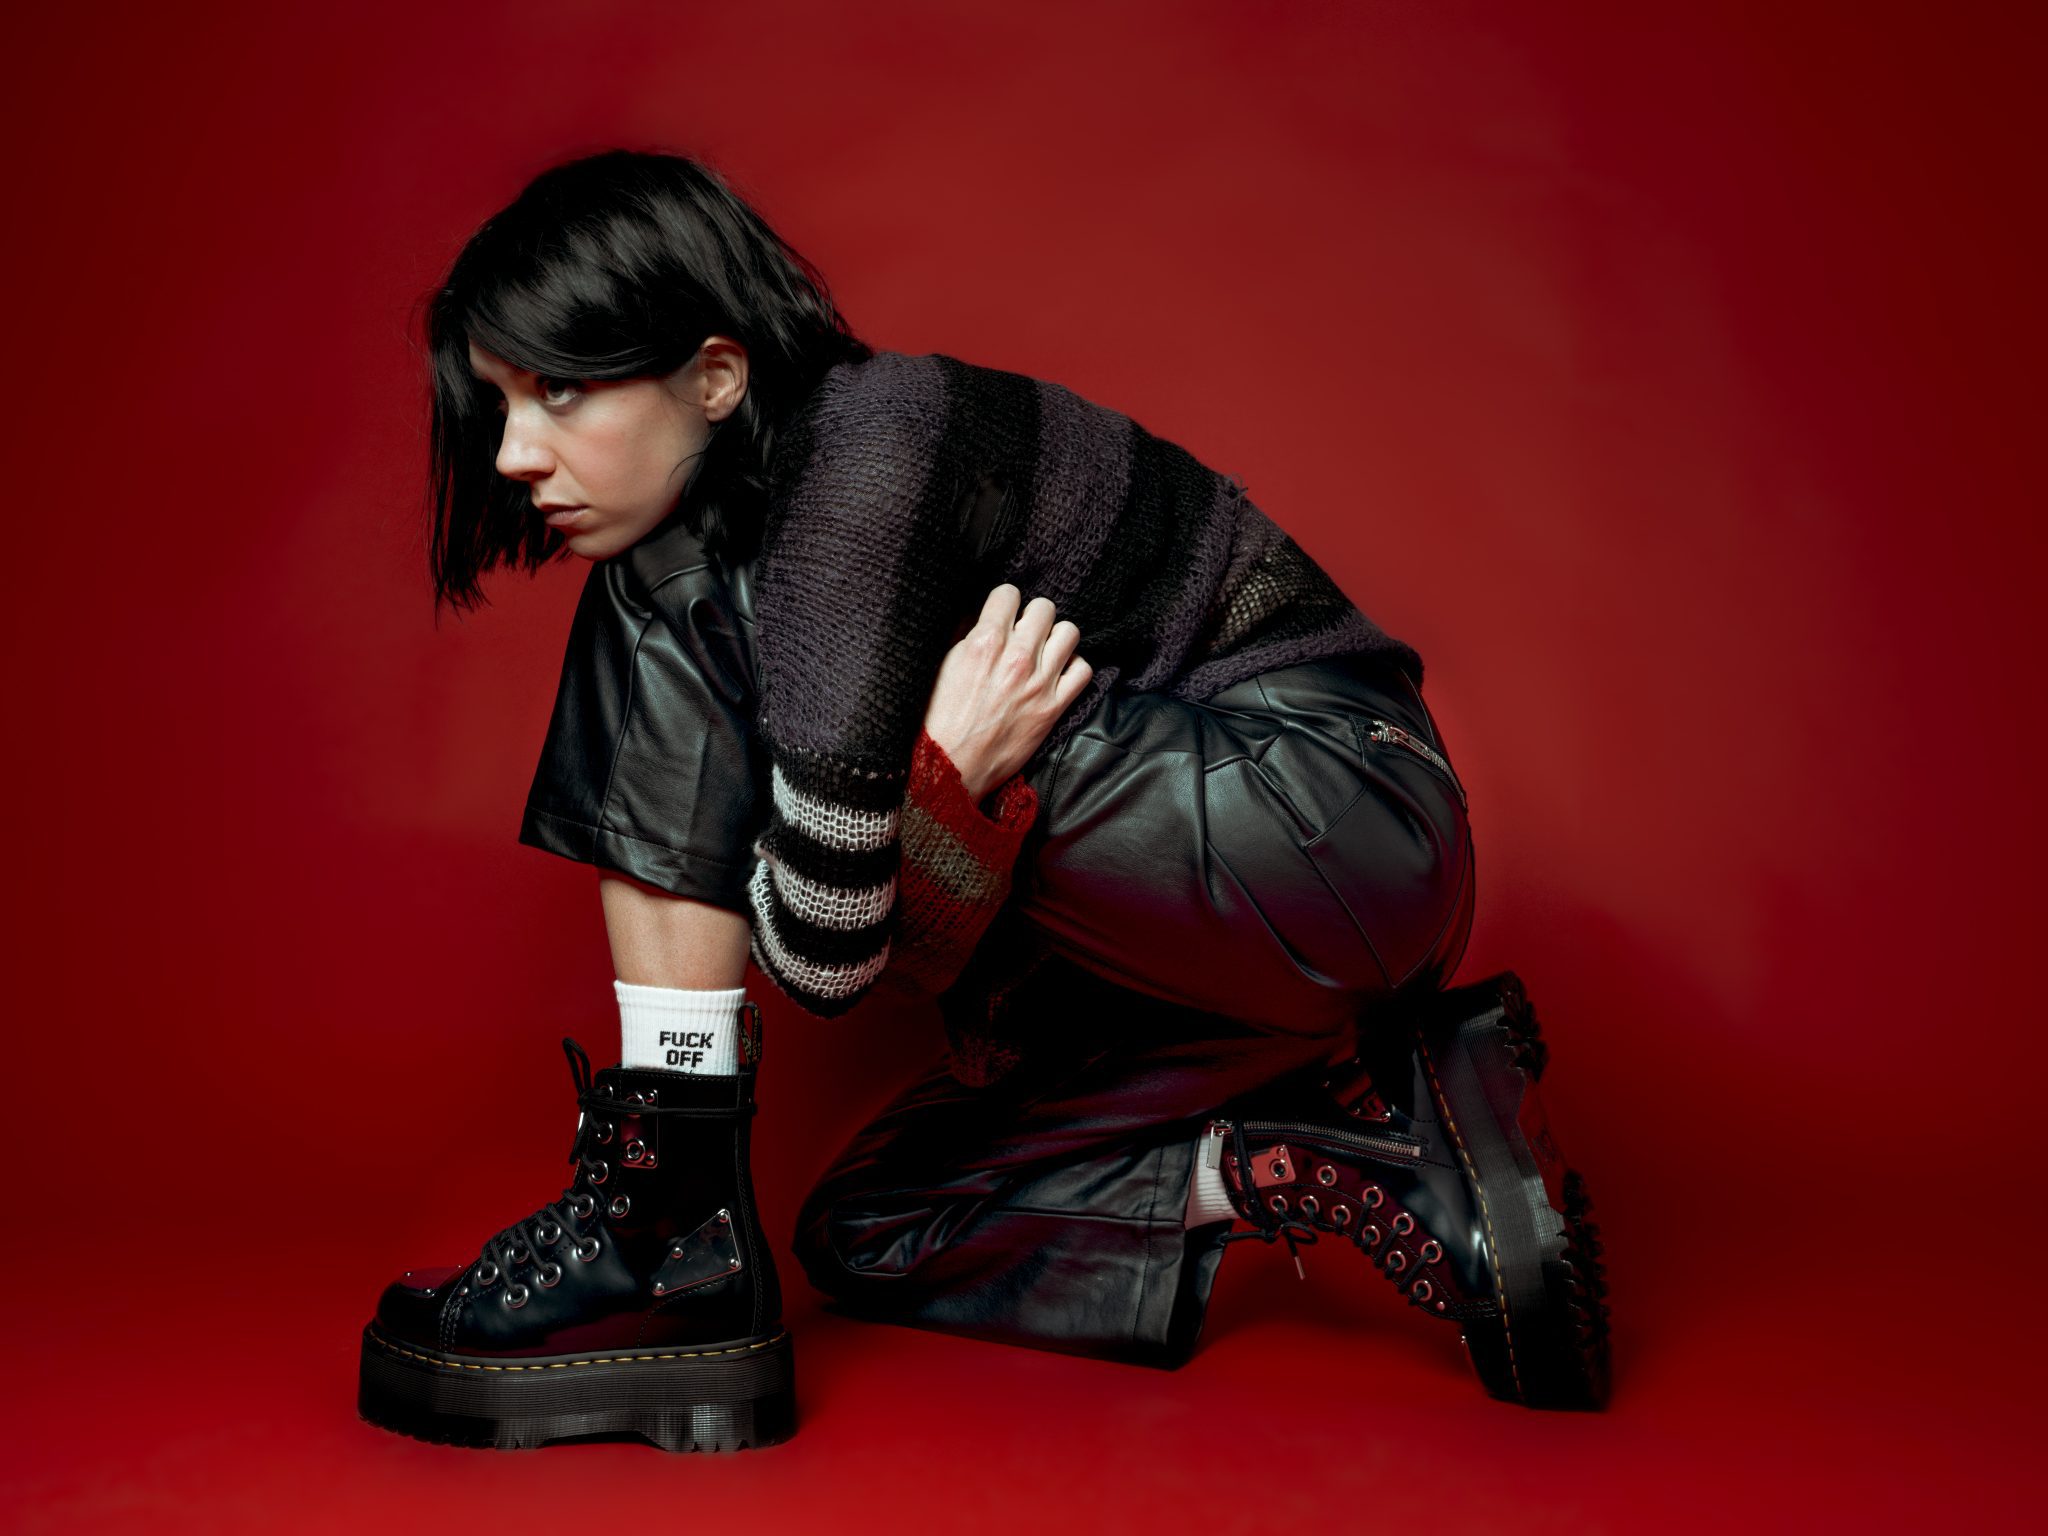 K Flay press photo. K Flay is sitting on the floor wearing all black in front of a red backdrop.